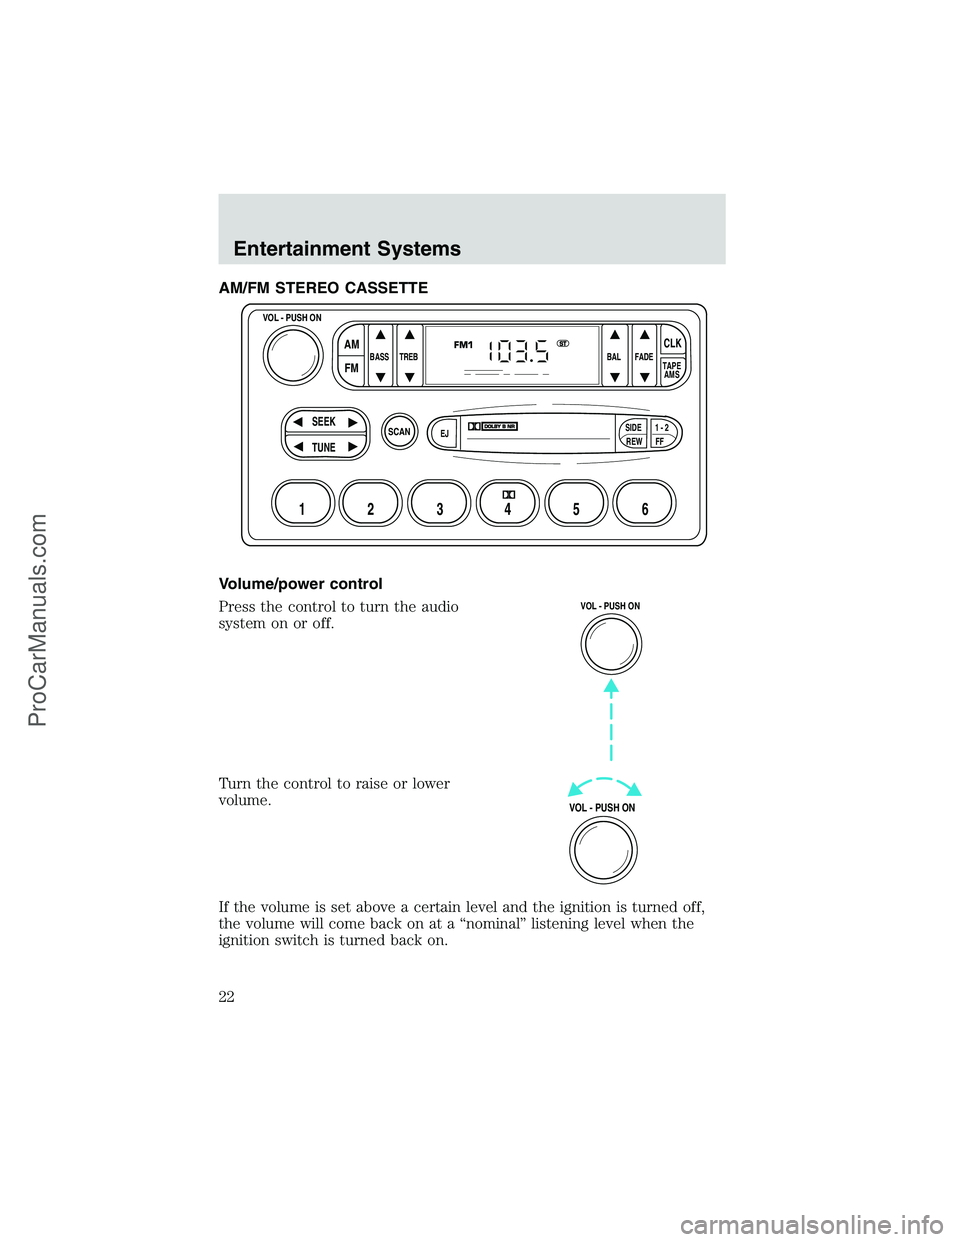 FORD E-450 2002  Owners Manual AM/FM STEREO CASSETTE
Volume/power control
Press the control to turn the audio
system on or off.
Turn the control to raise or lower
volume.
If the volume is set above a certain level and the ignition 